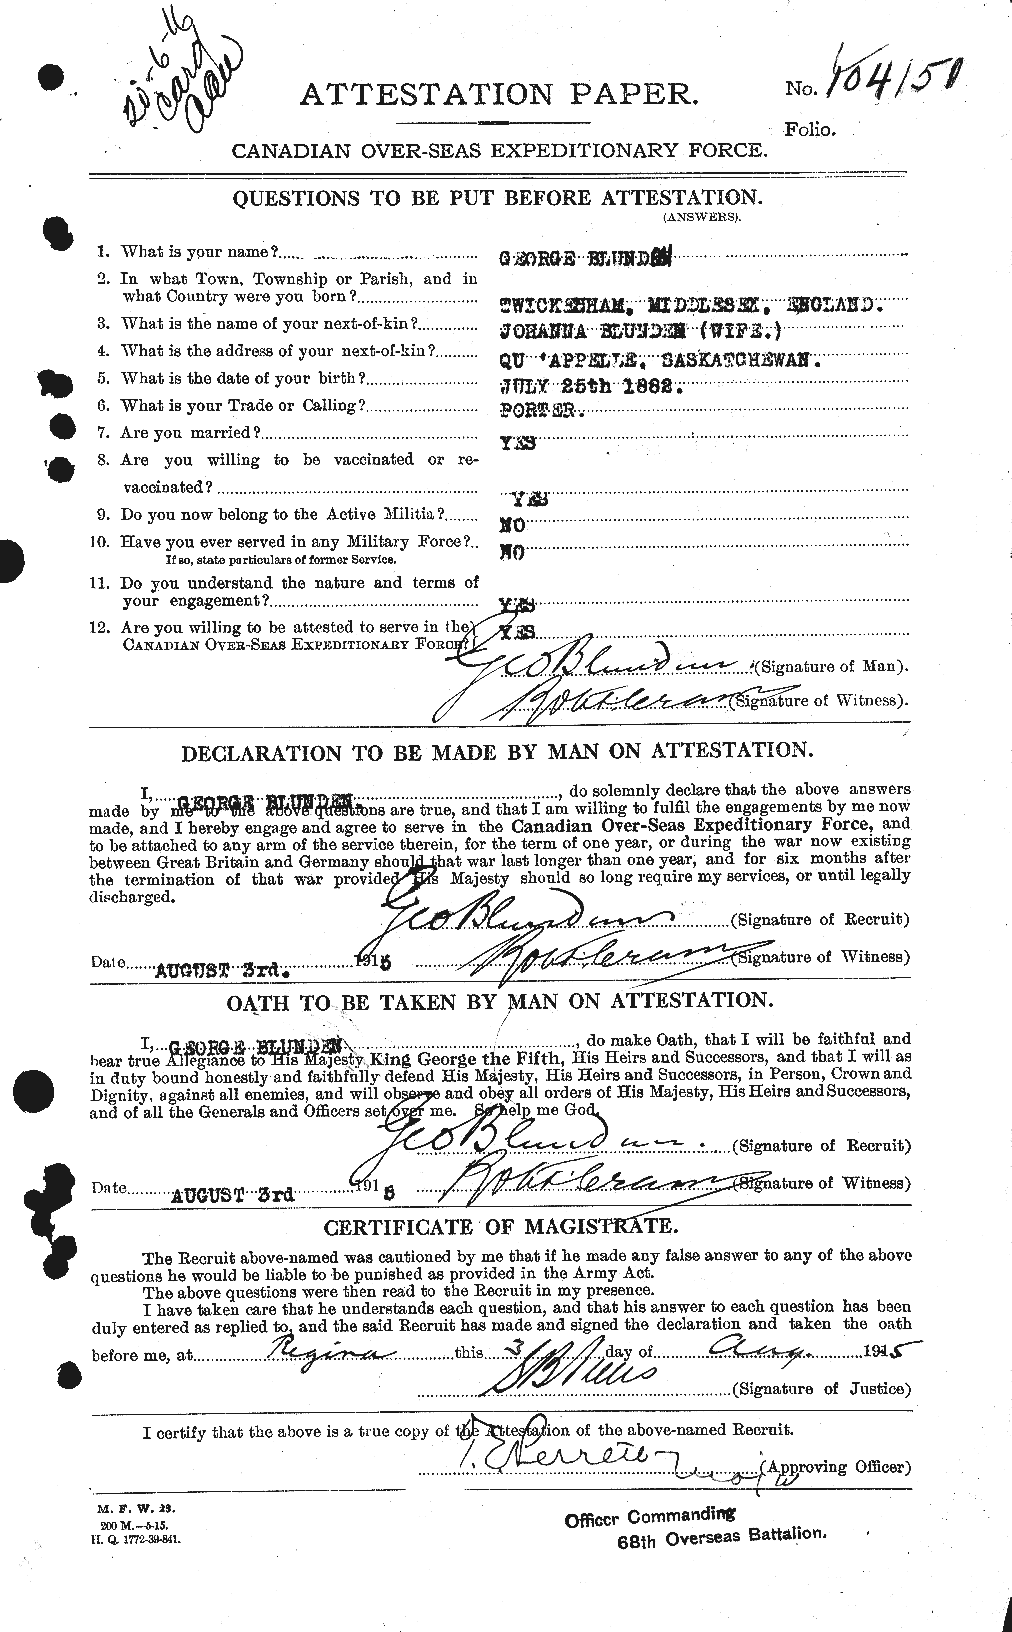 Personnel Records of the First World War - CEF 247218a